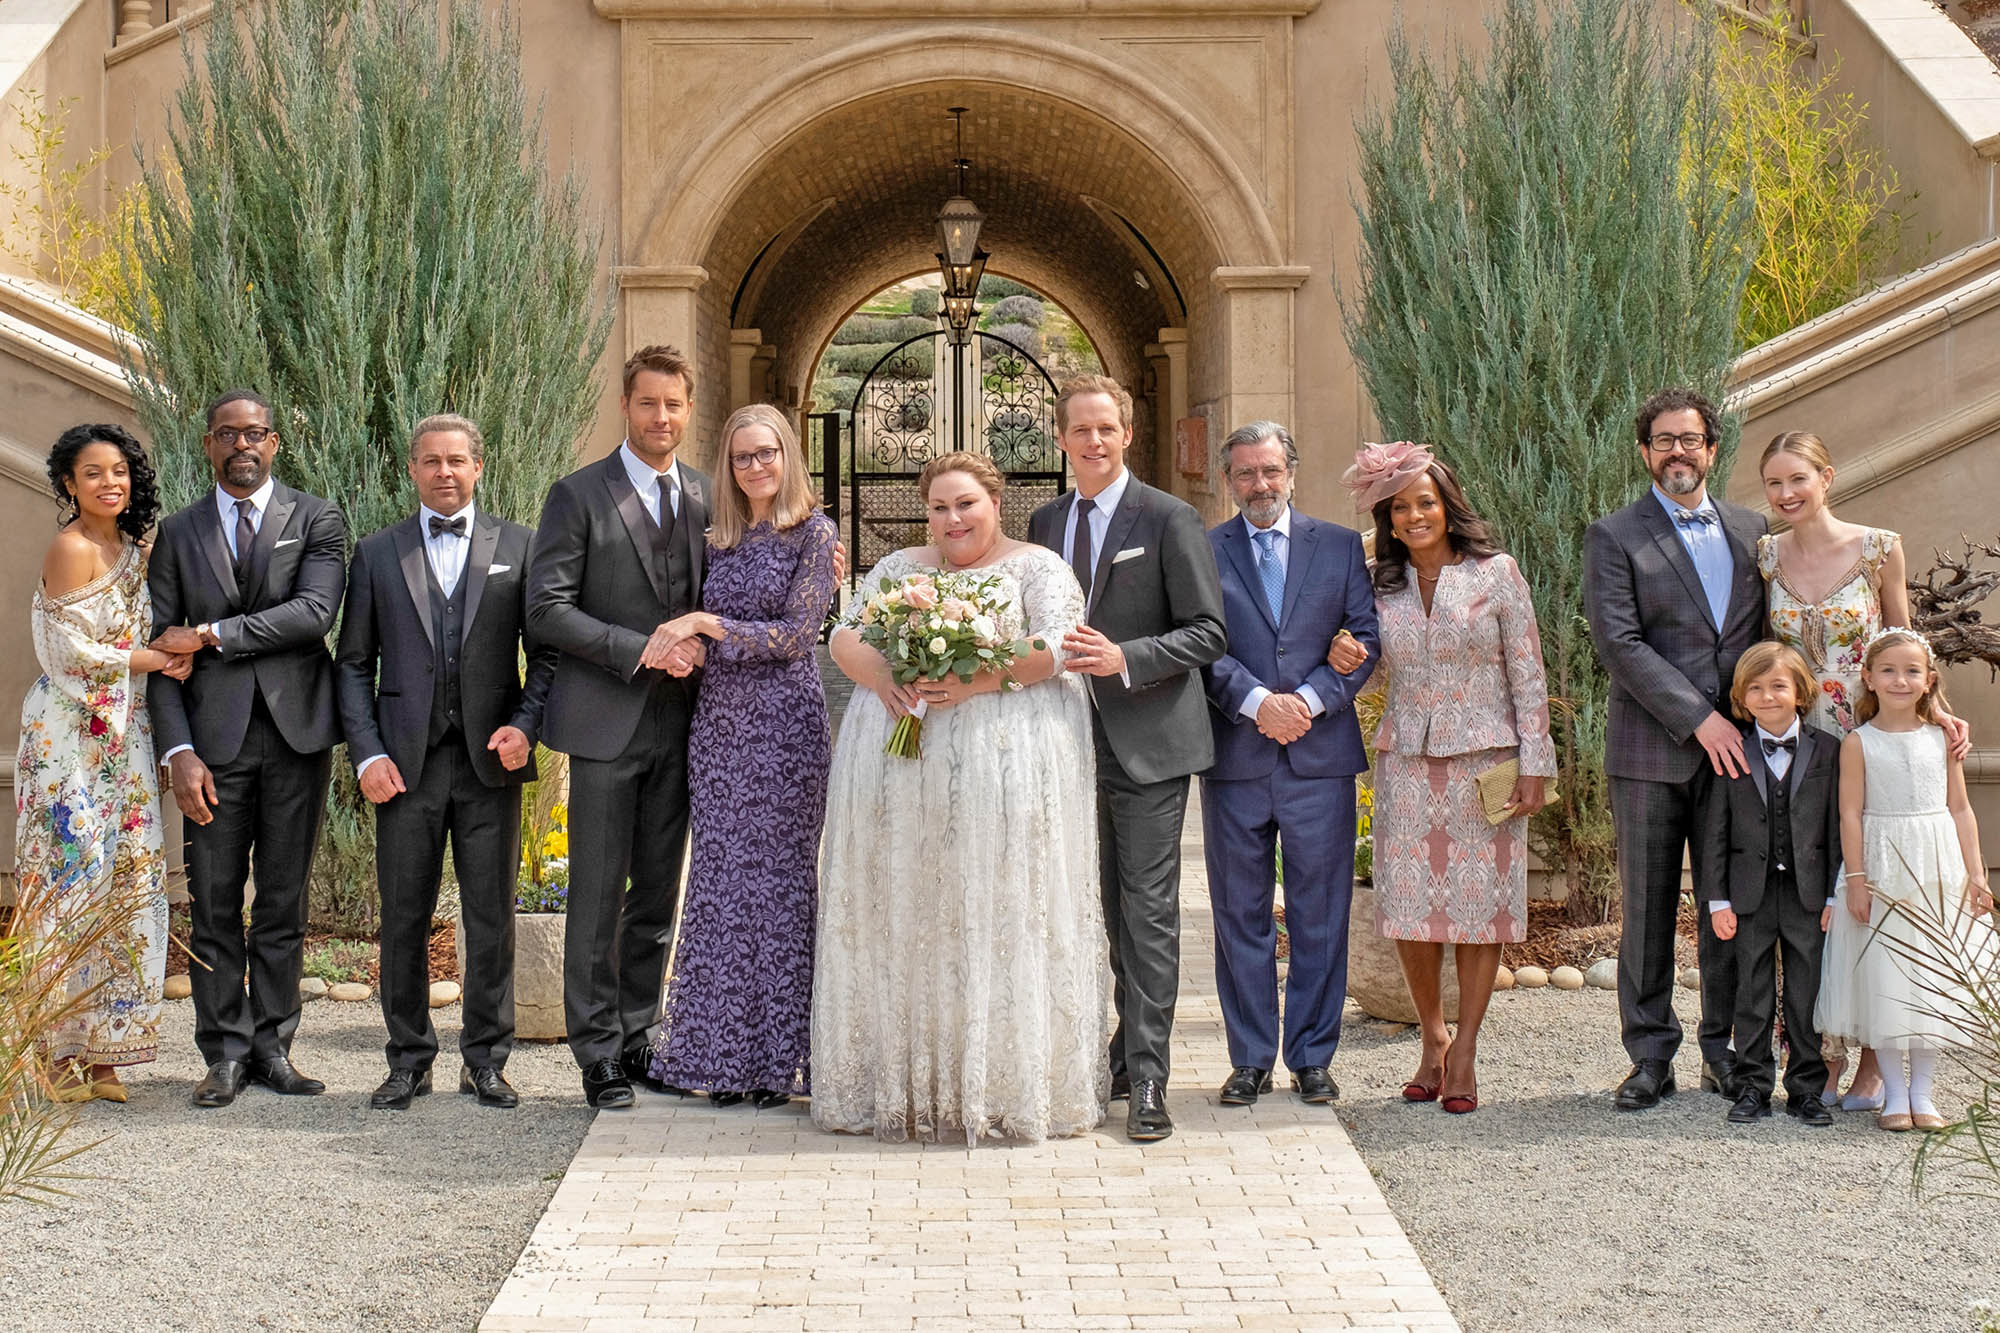 This Is Us Too: 6.13 – “Day Of The Wedding”